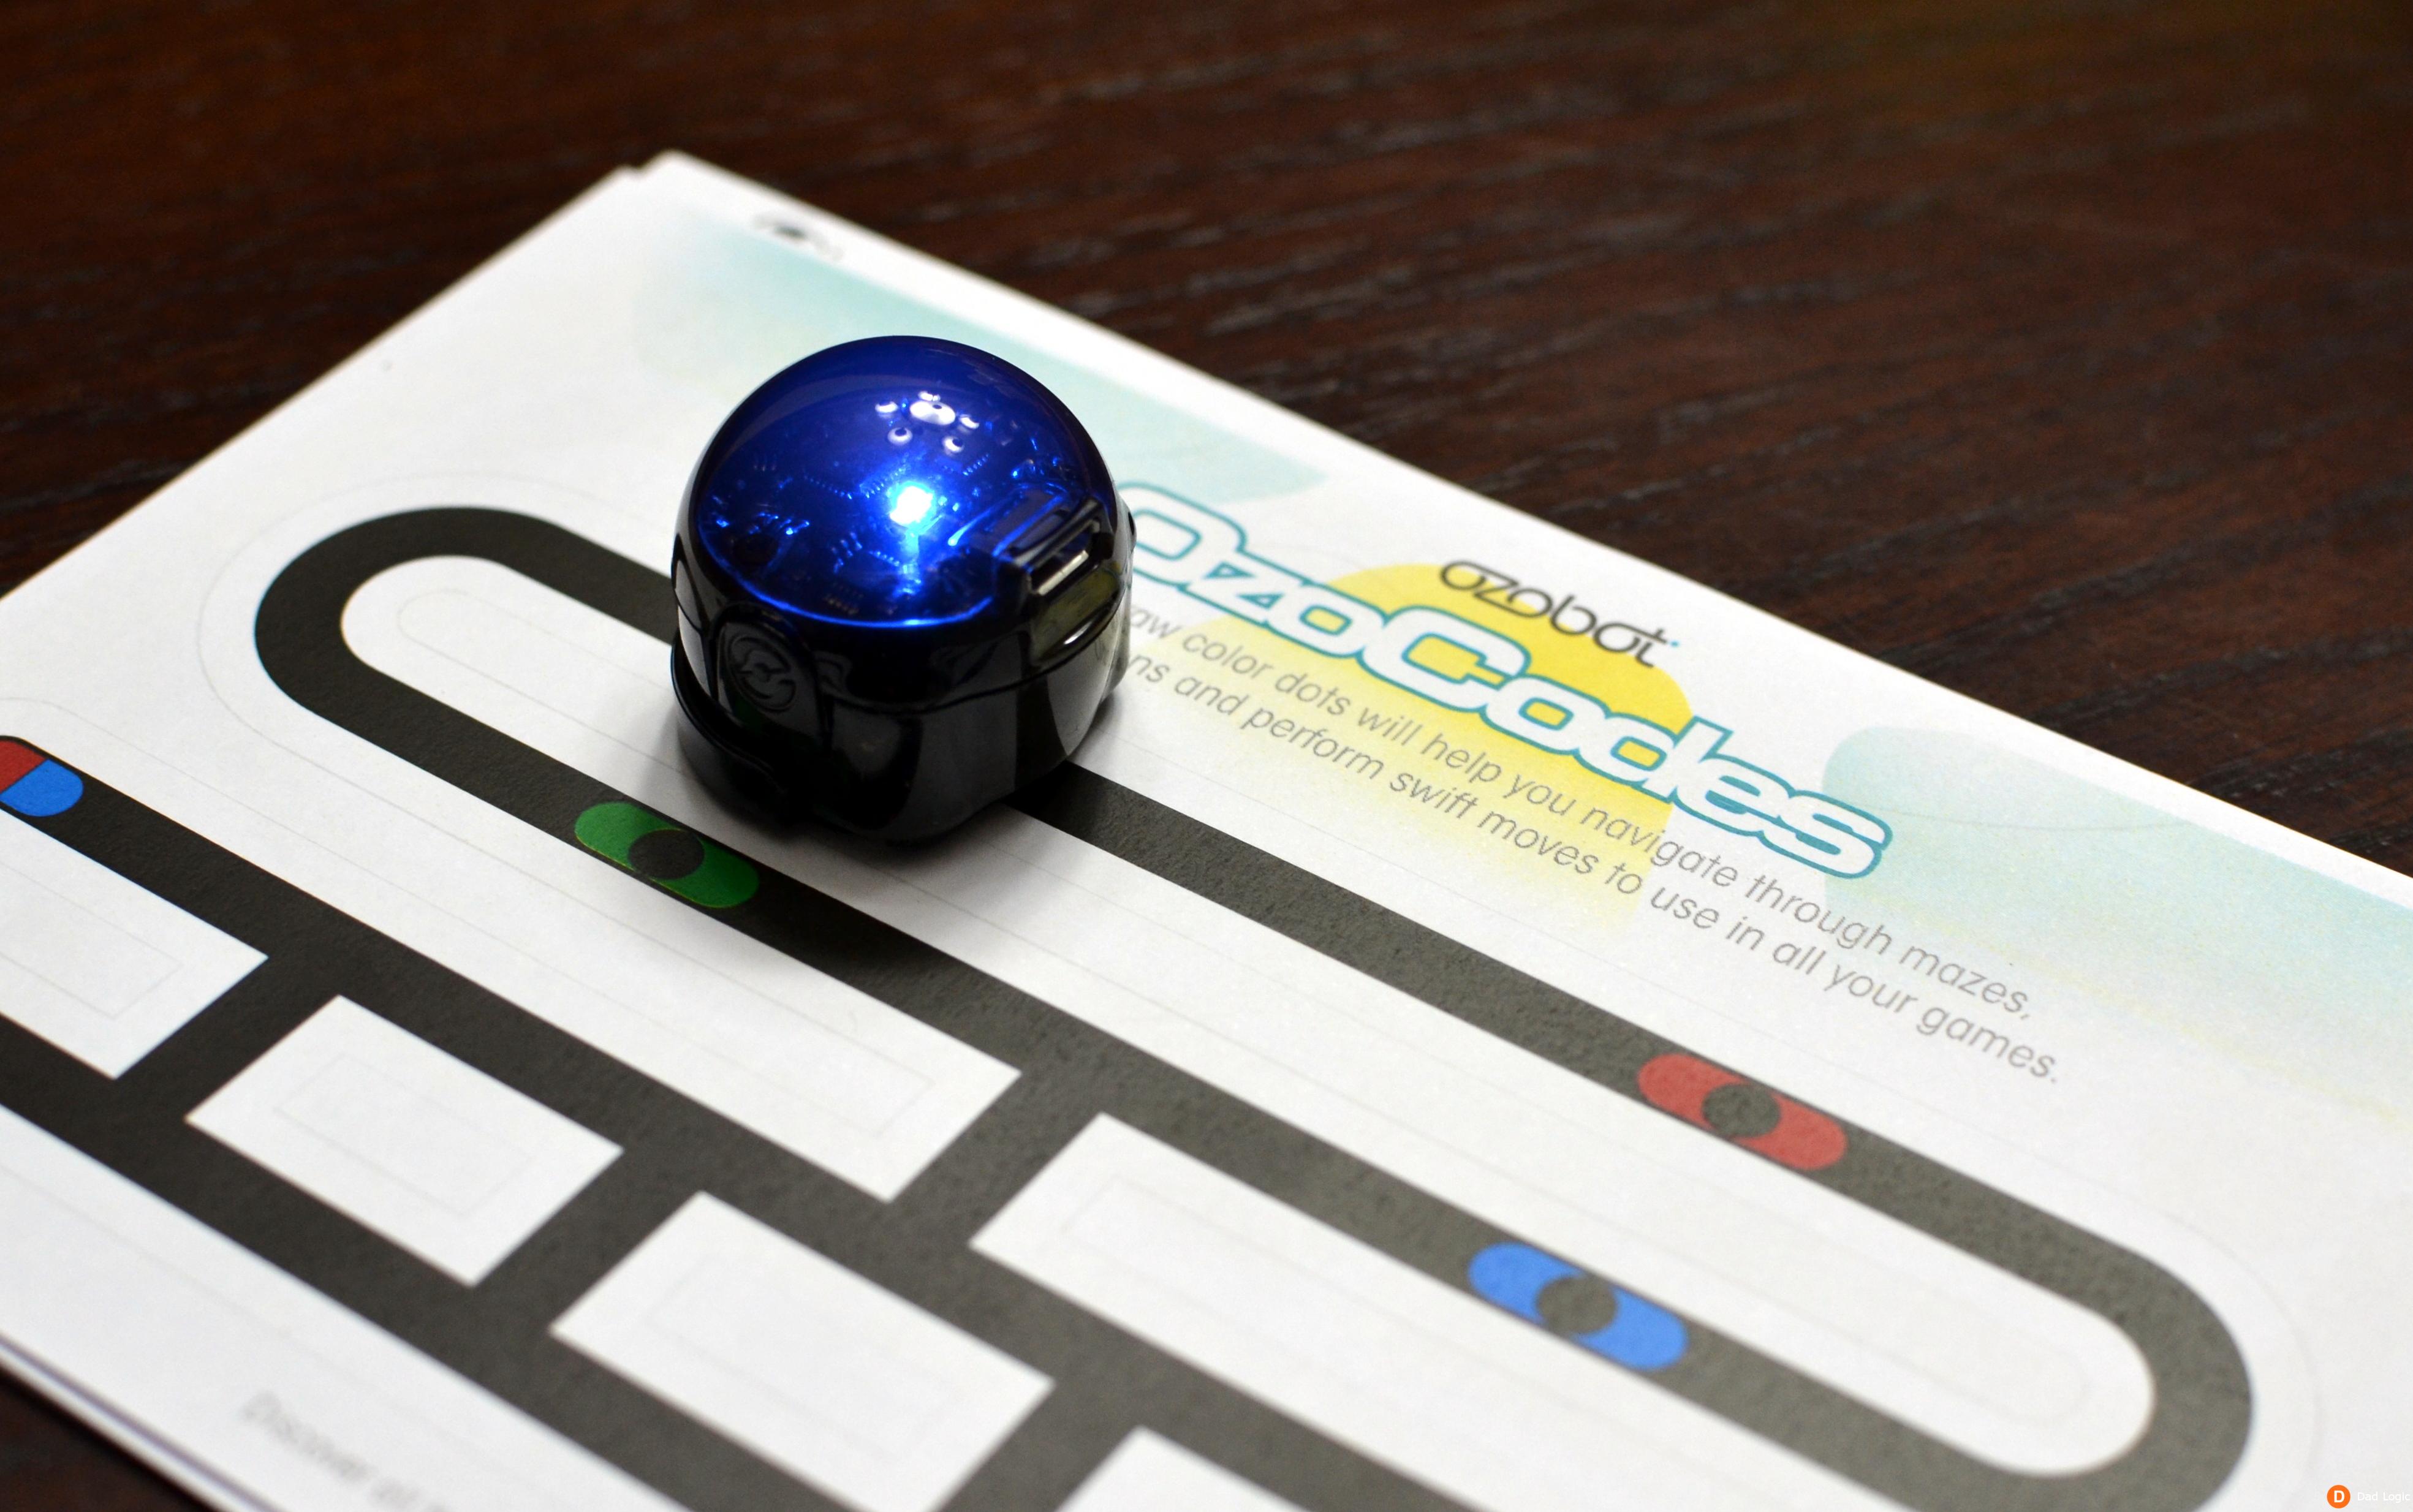 Ozobot Bit is an Amazing Little Robot Your Child Can Program - Dad